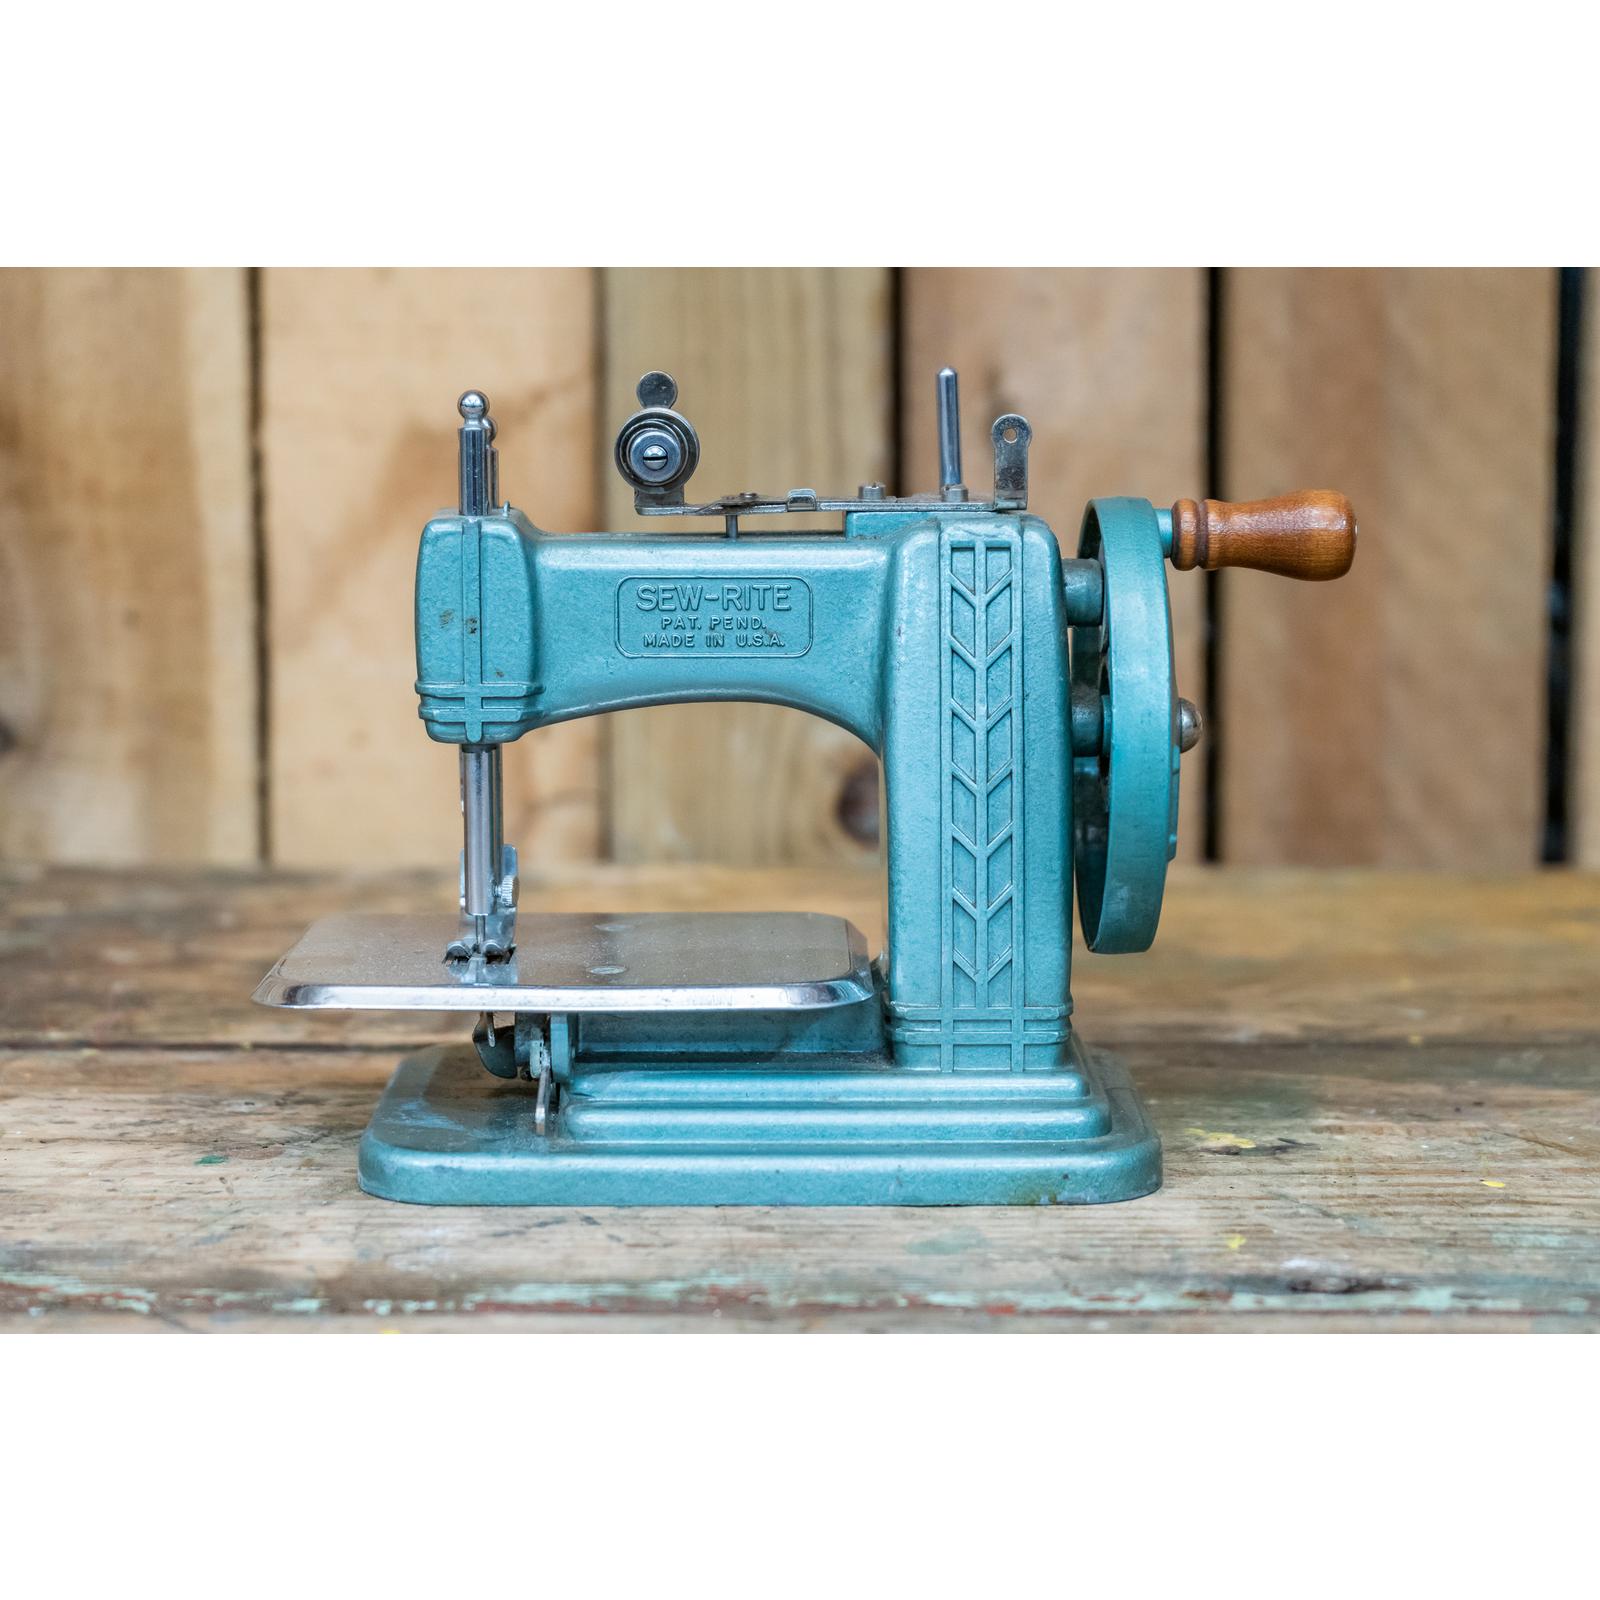 Using a hand crank sewing machine - Home and Geek